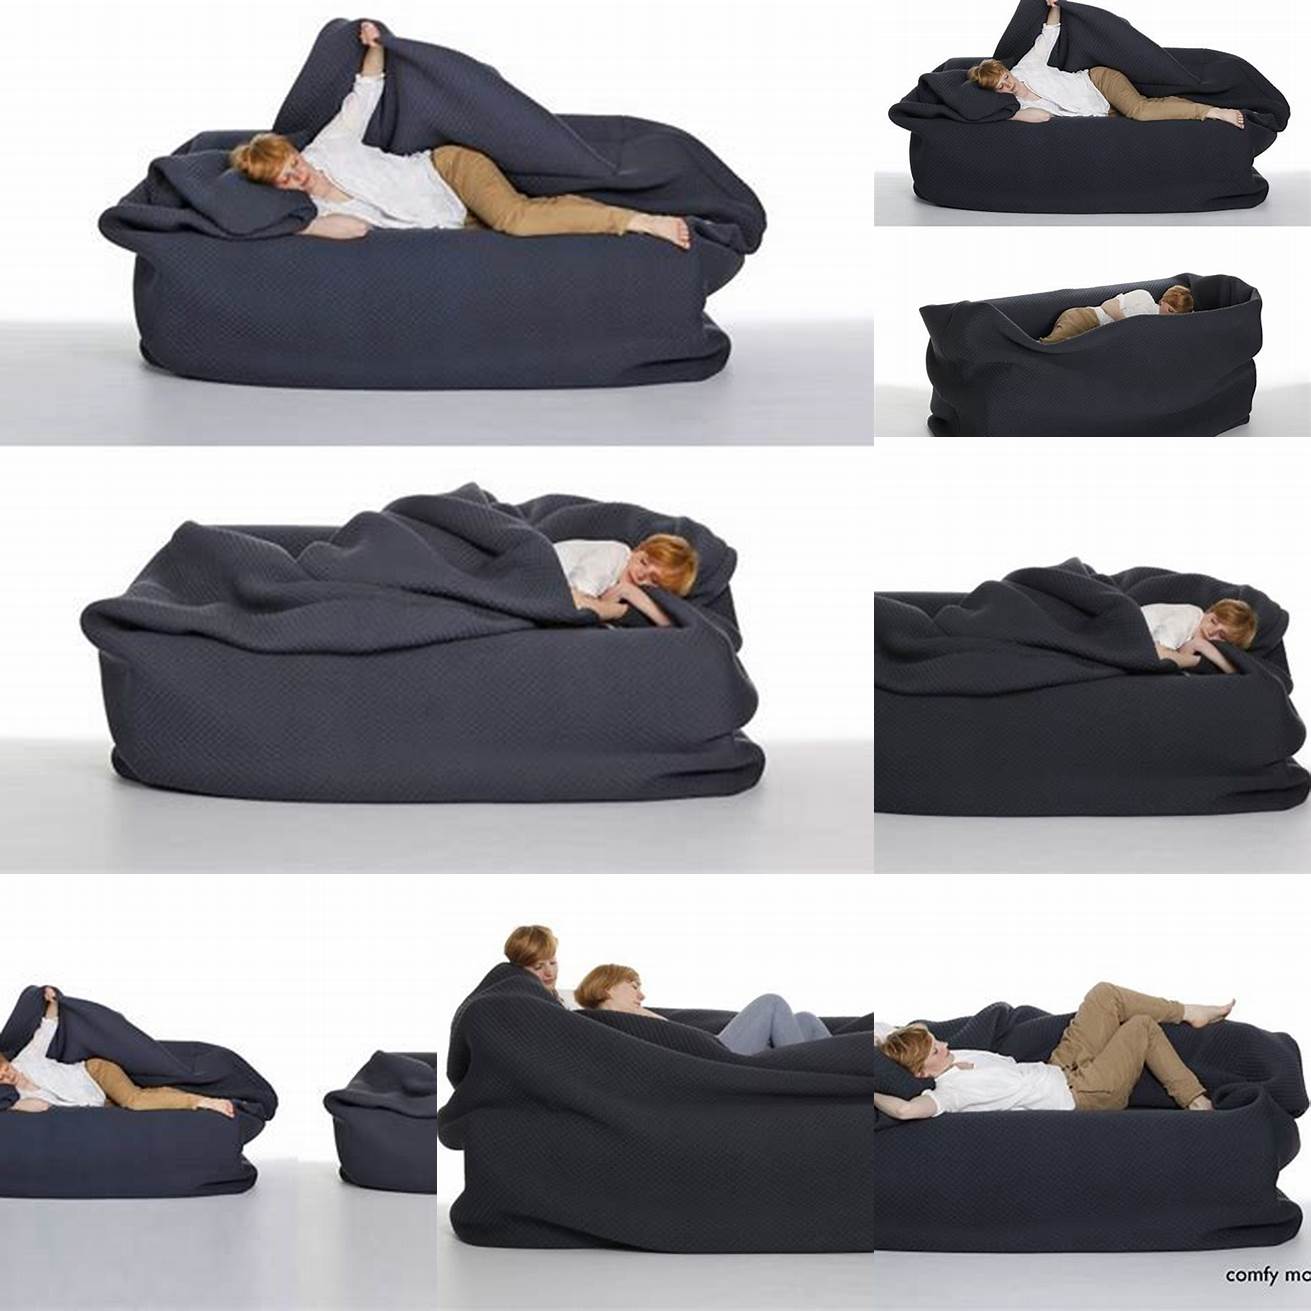 Image of the Bean Bag Bed with Built In Blanket